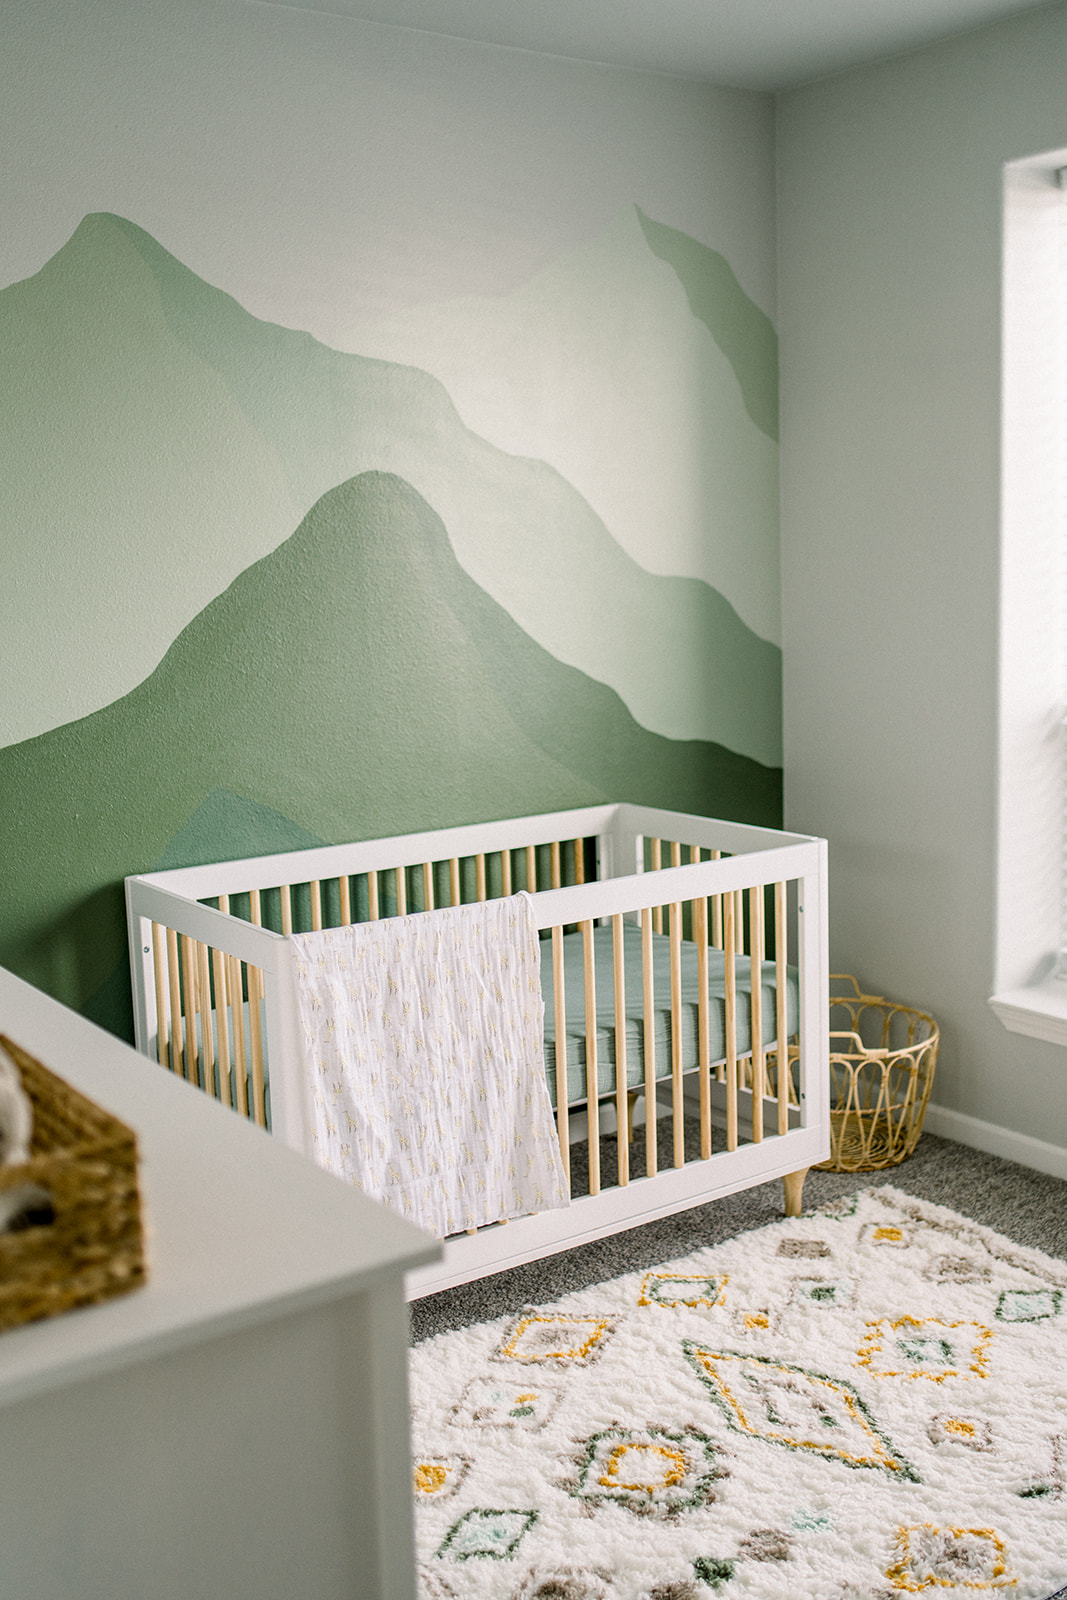 Baby crib in boy nursery at In home maternity photo shoot Sonora, CA photographer